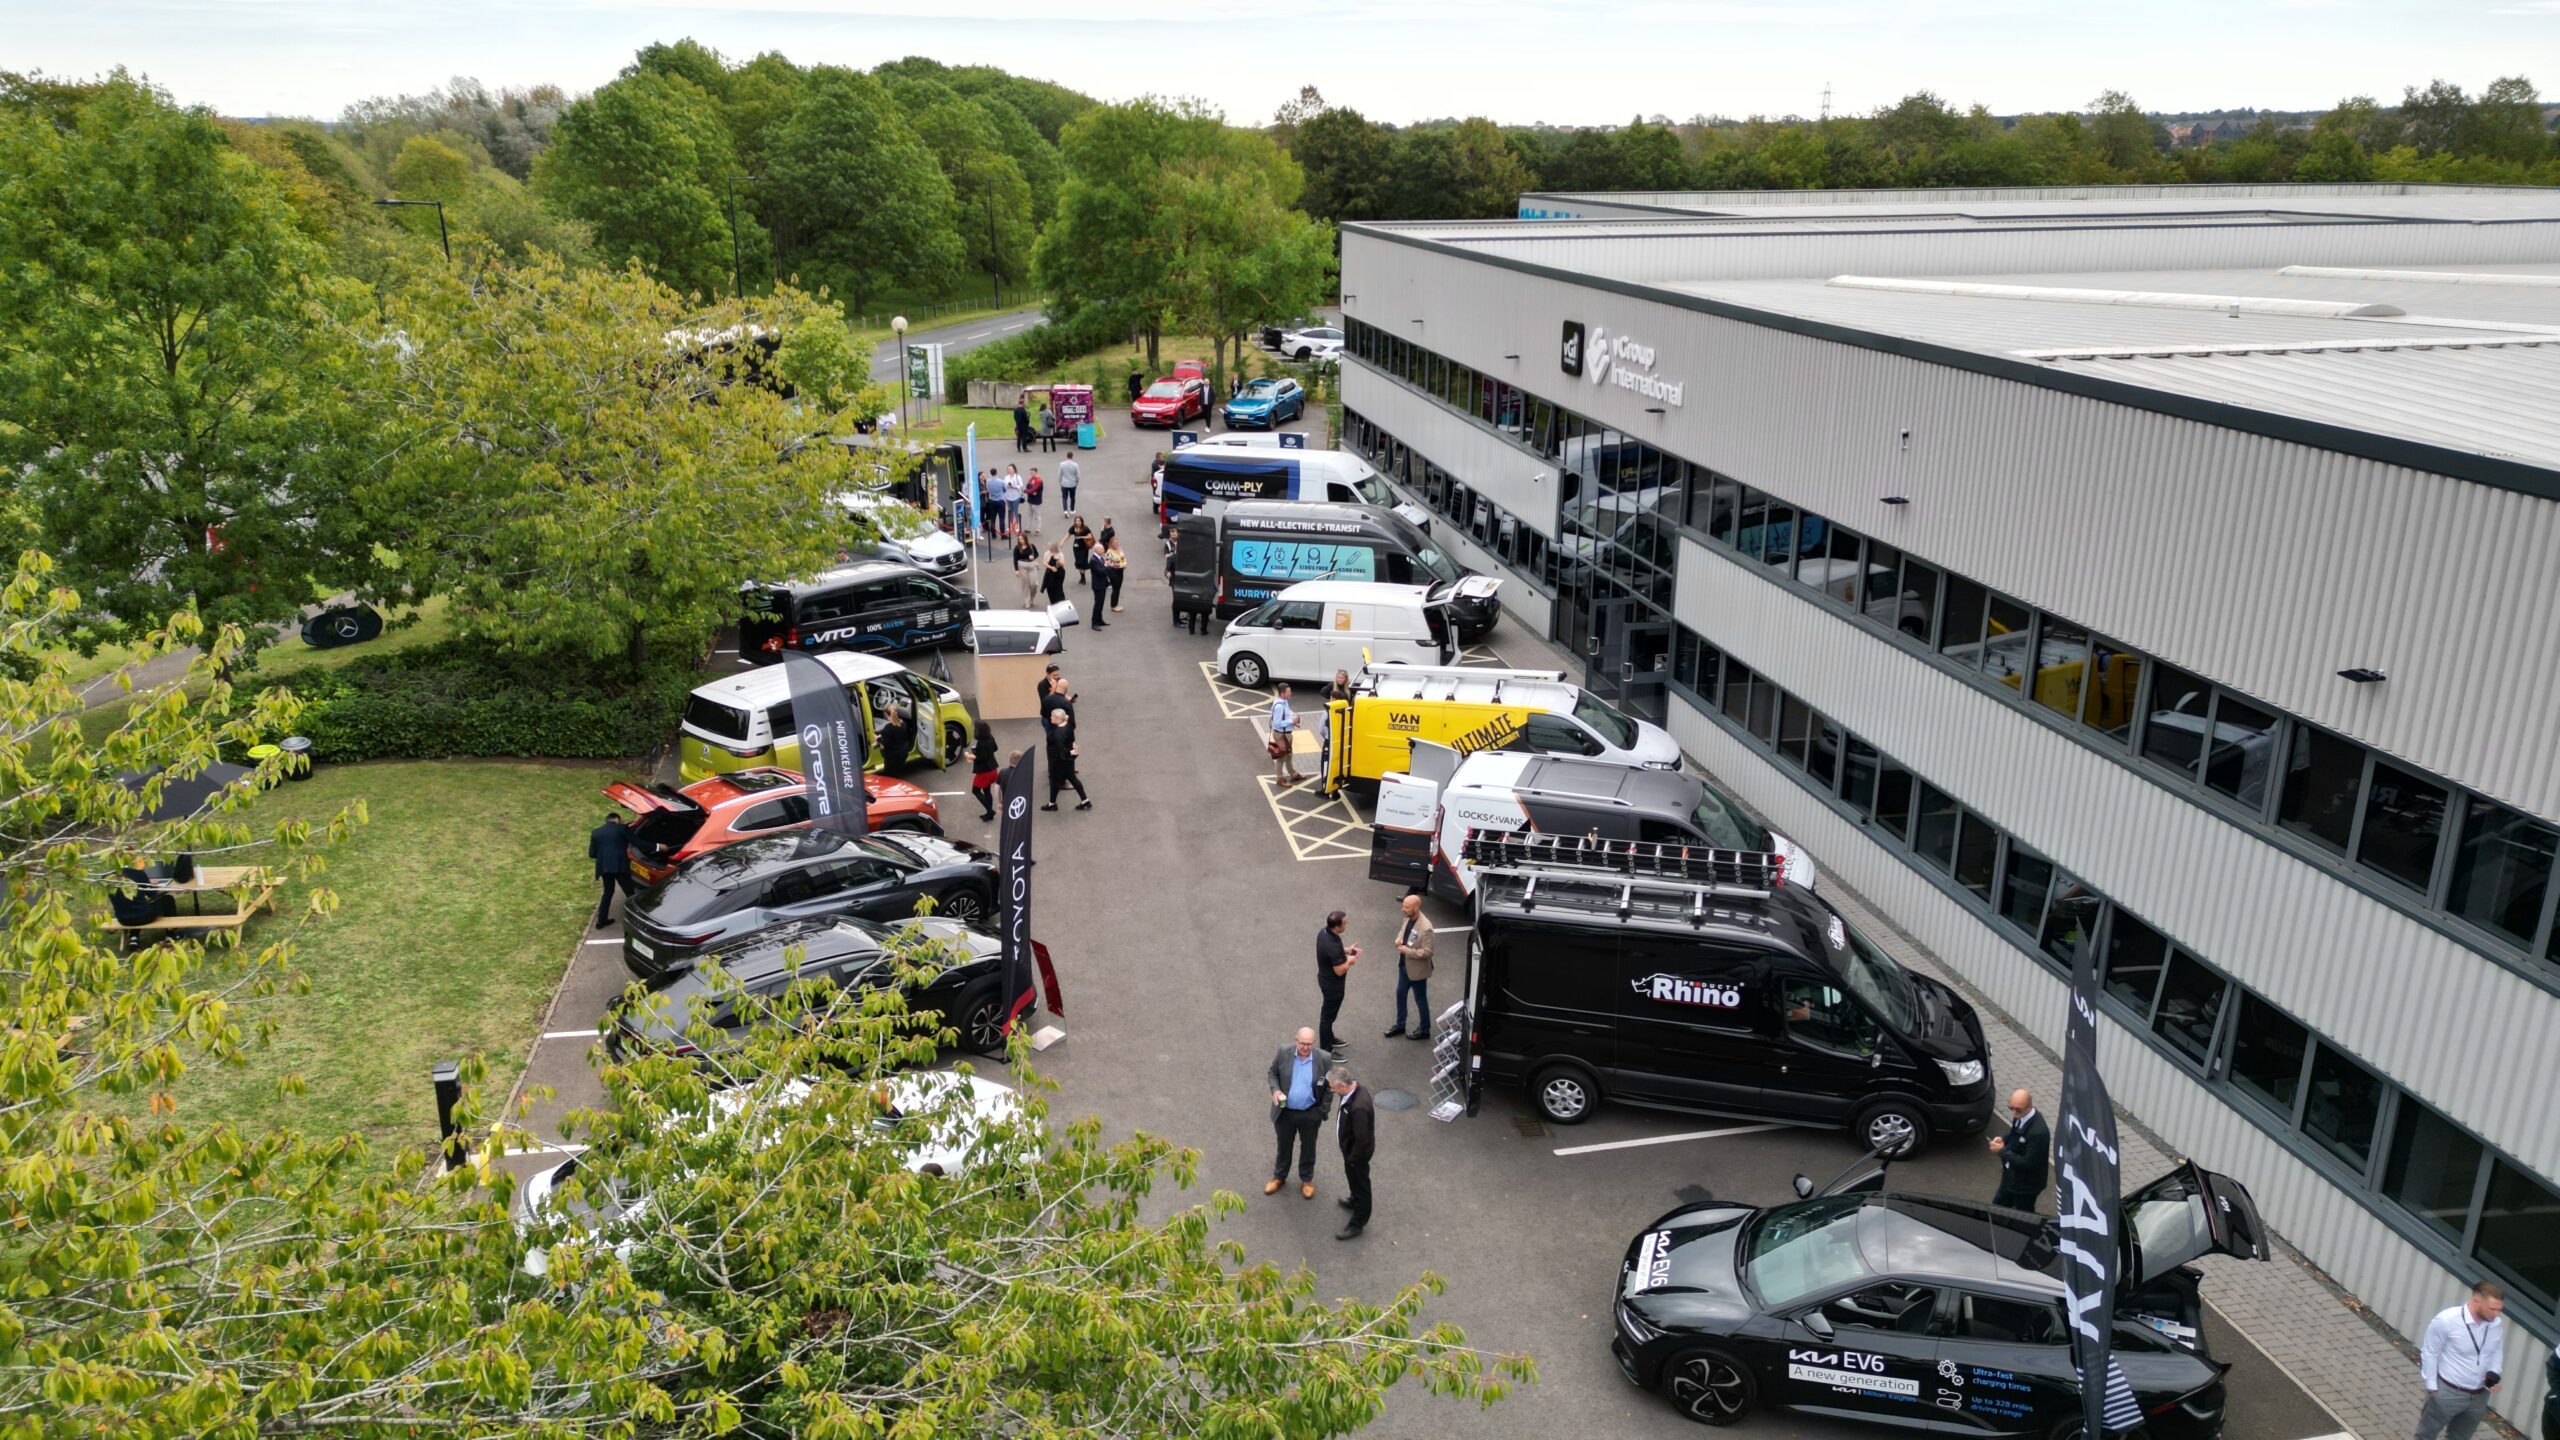 Going Greener, celebrating sustainable mobility in Milton Keynes, hosted by vGi Holdings